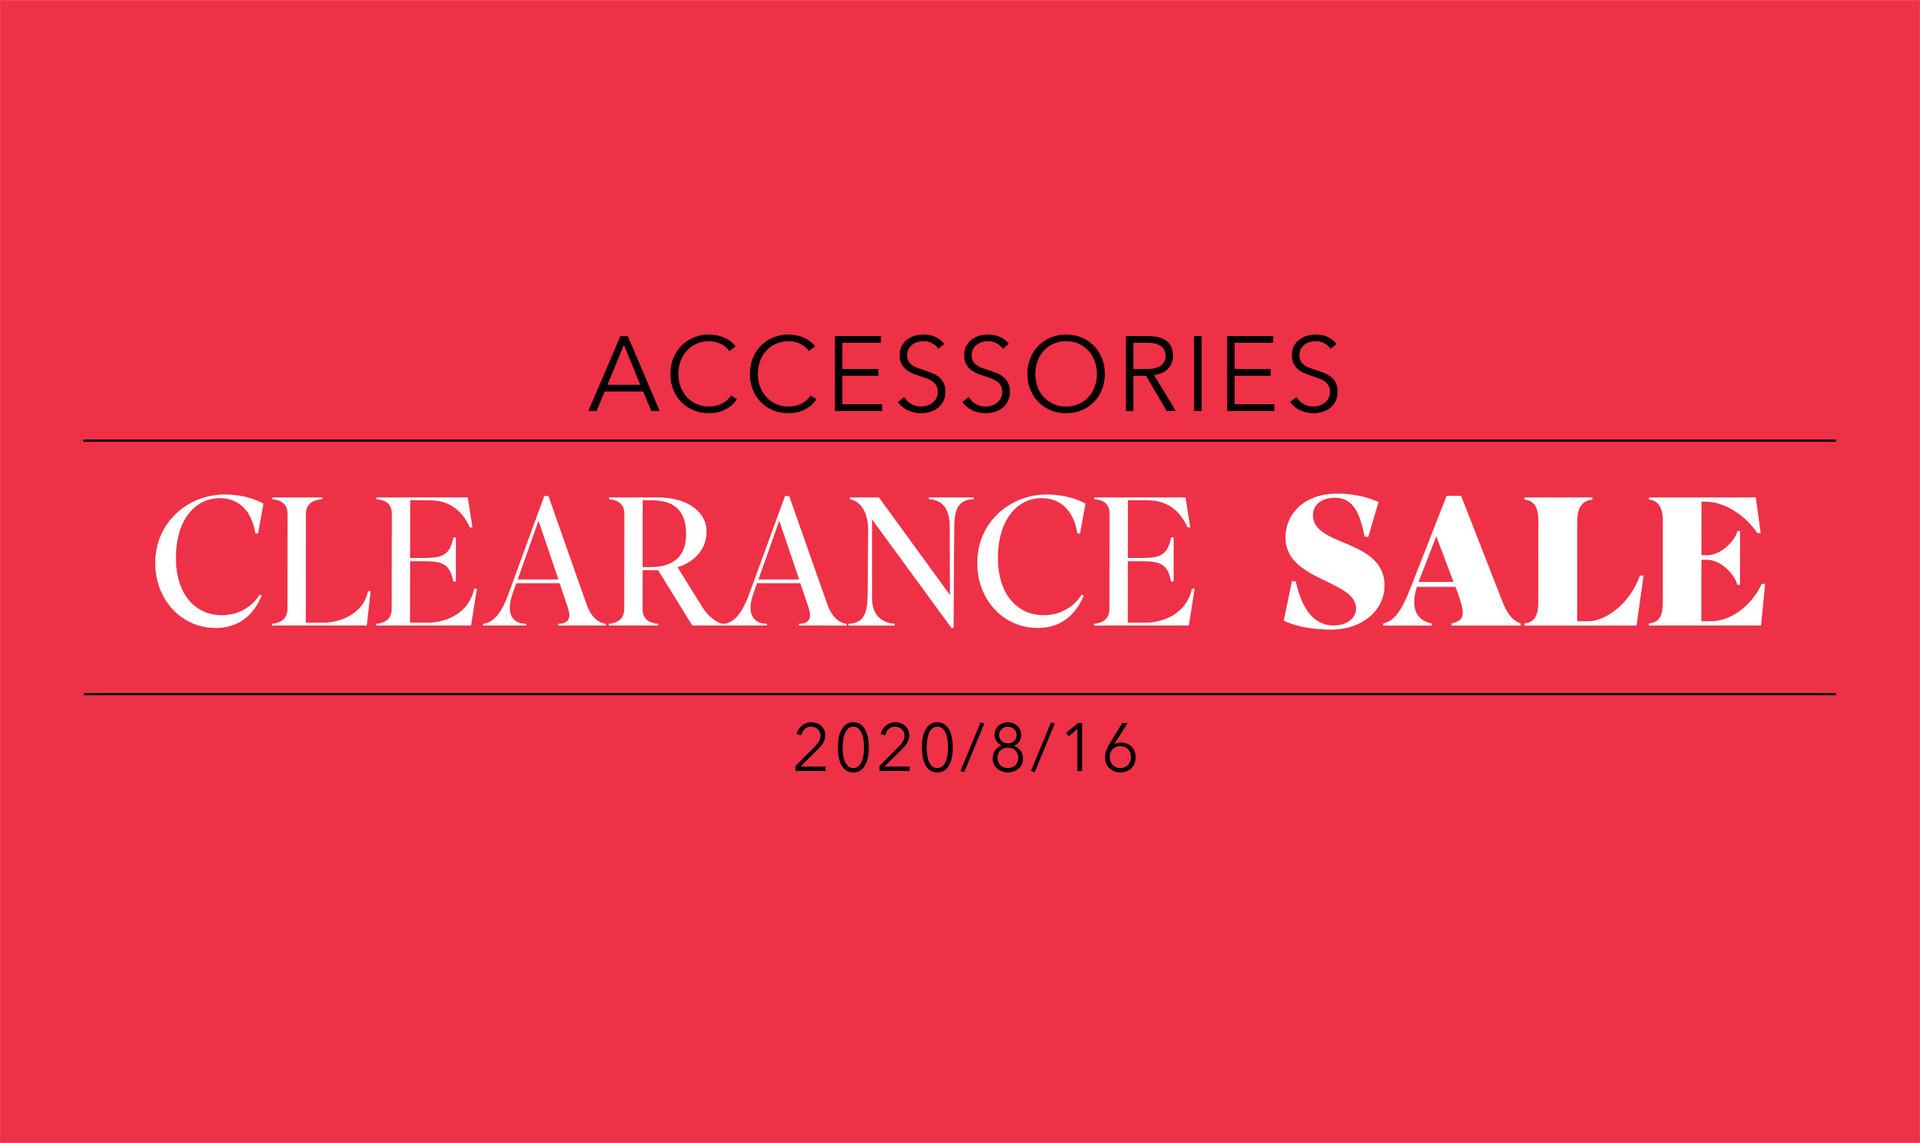 Clearance sale : Accessories